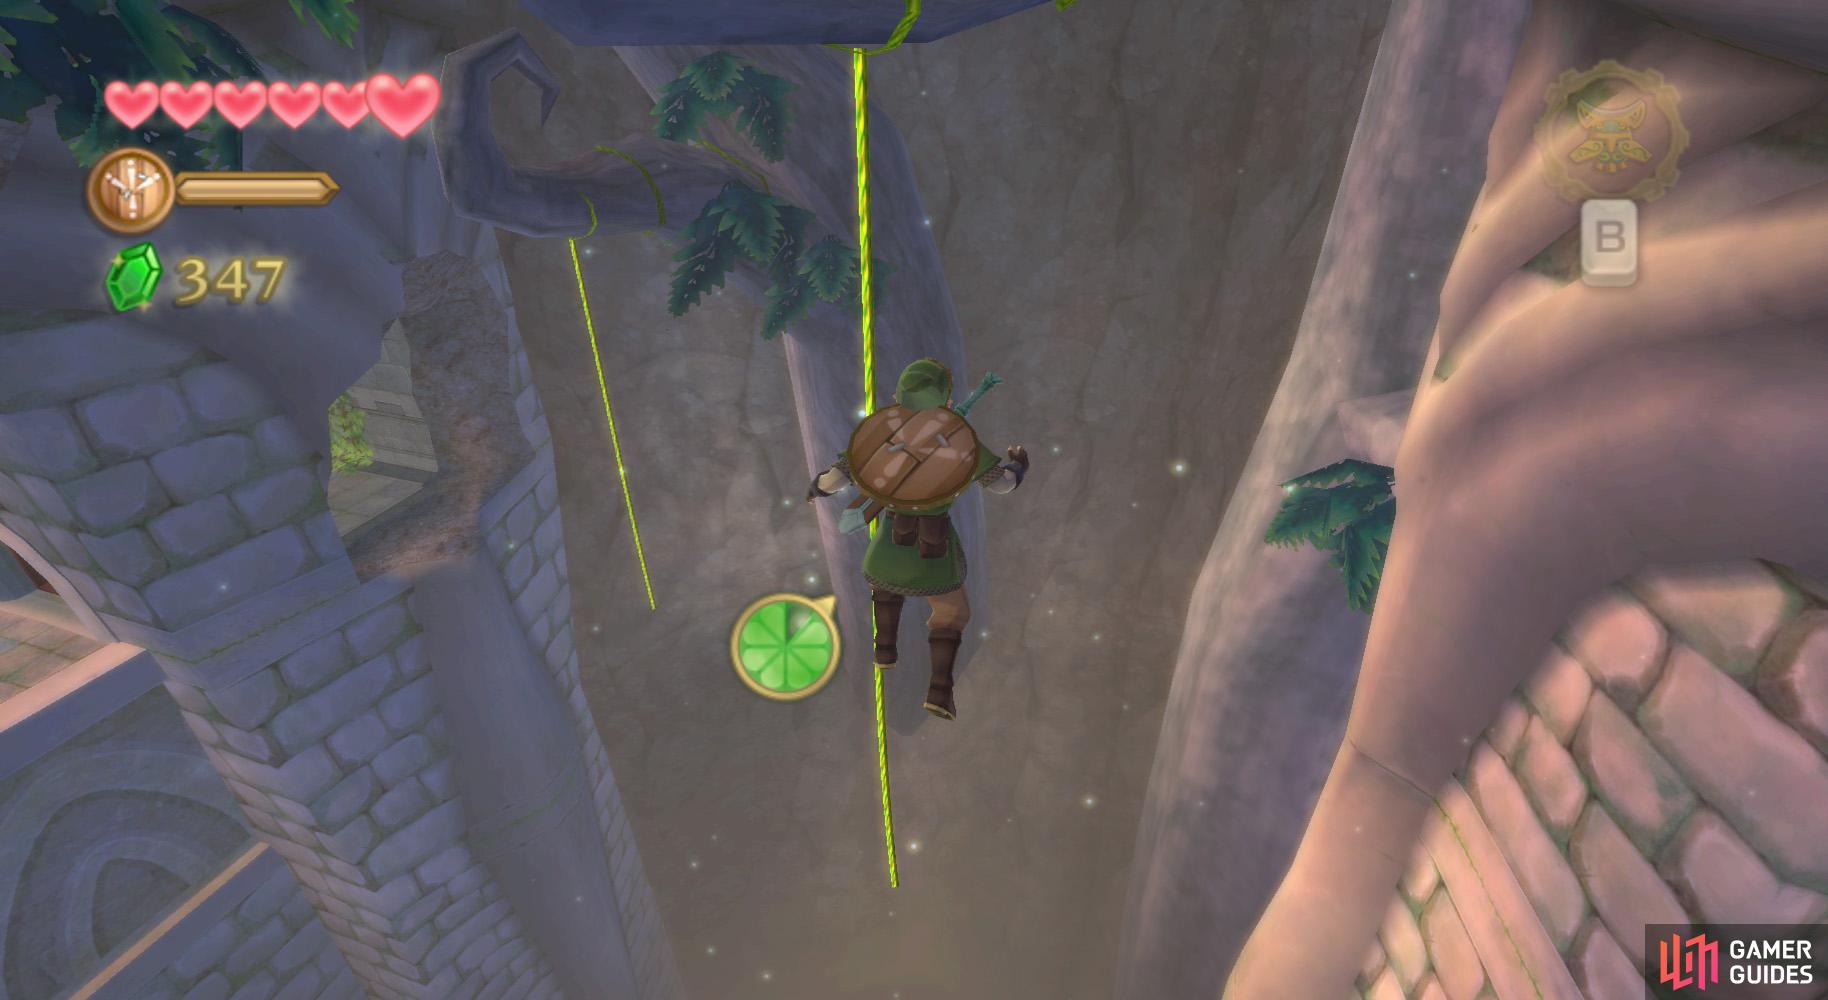 You'll need to swing across two vines to reach this final chest.